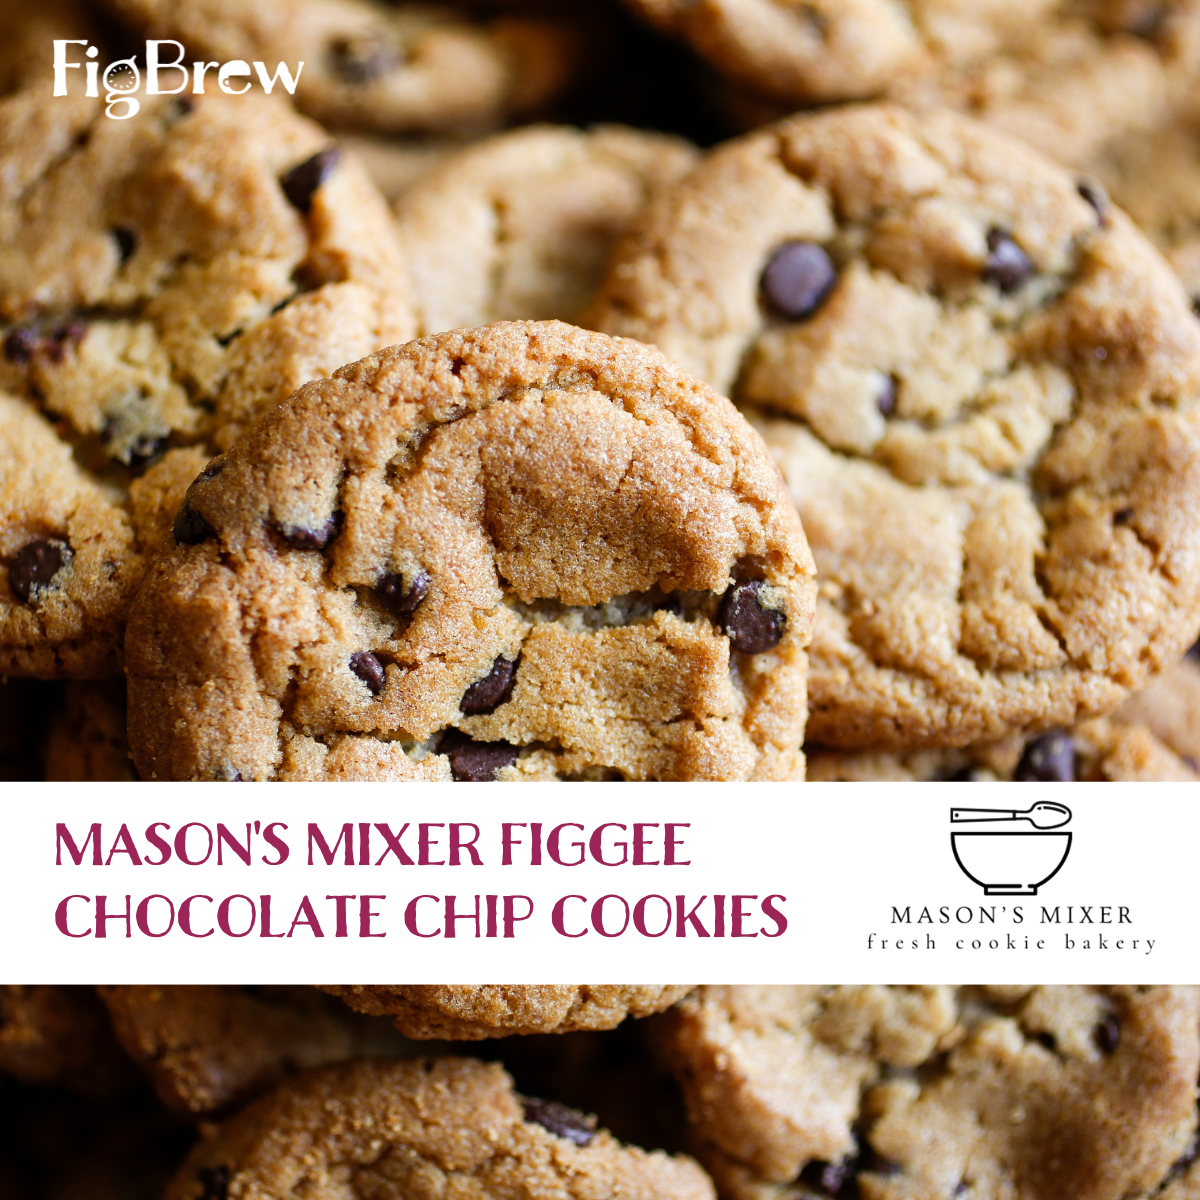 Mason's Mixer Figgee Chocolate Chip Cookies